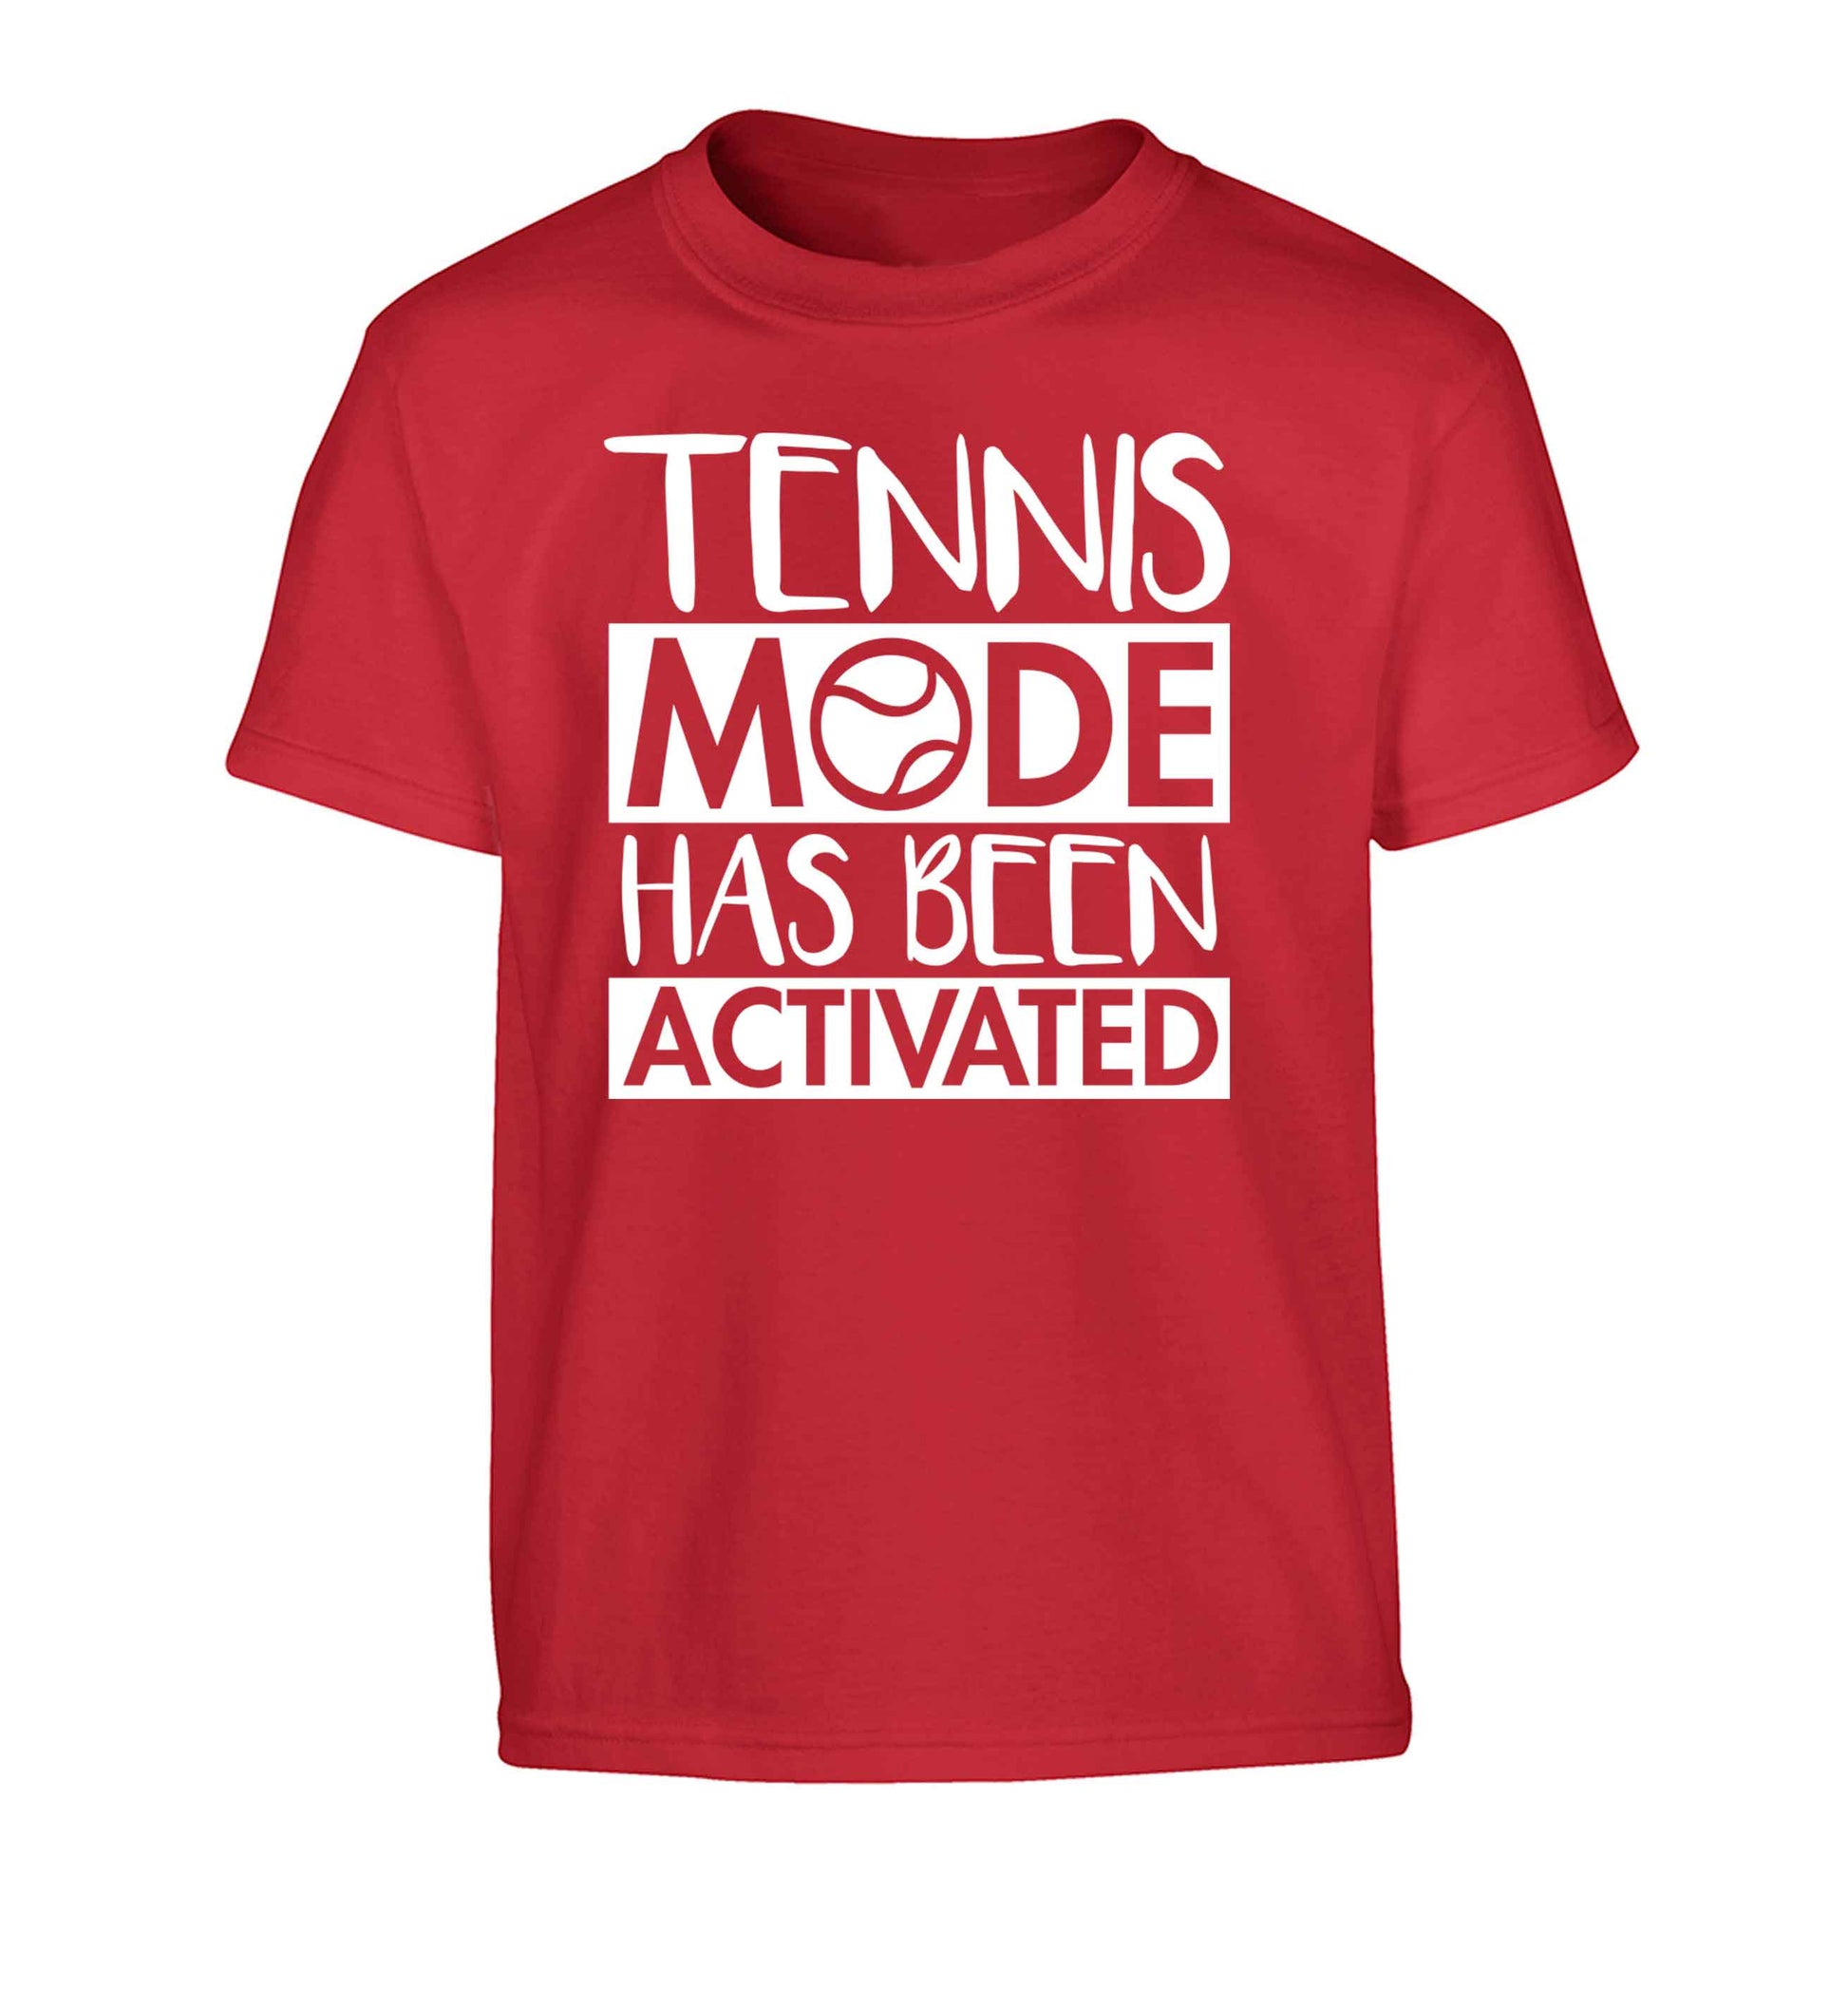 Tennis mode has been activated Children's red Tshirt 12-13 Years